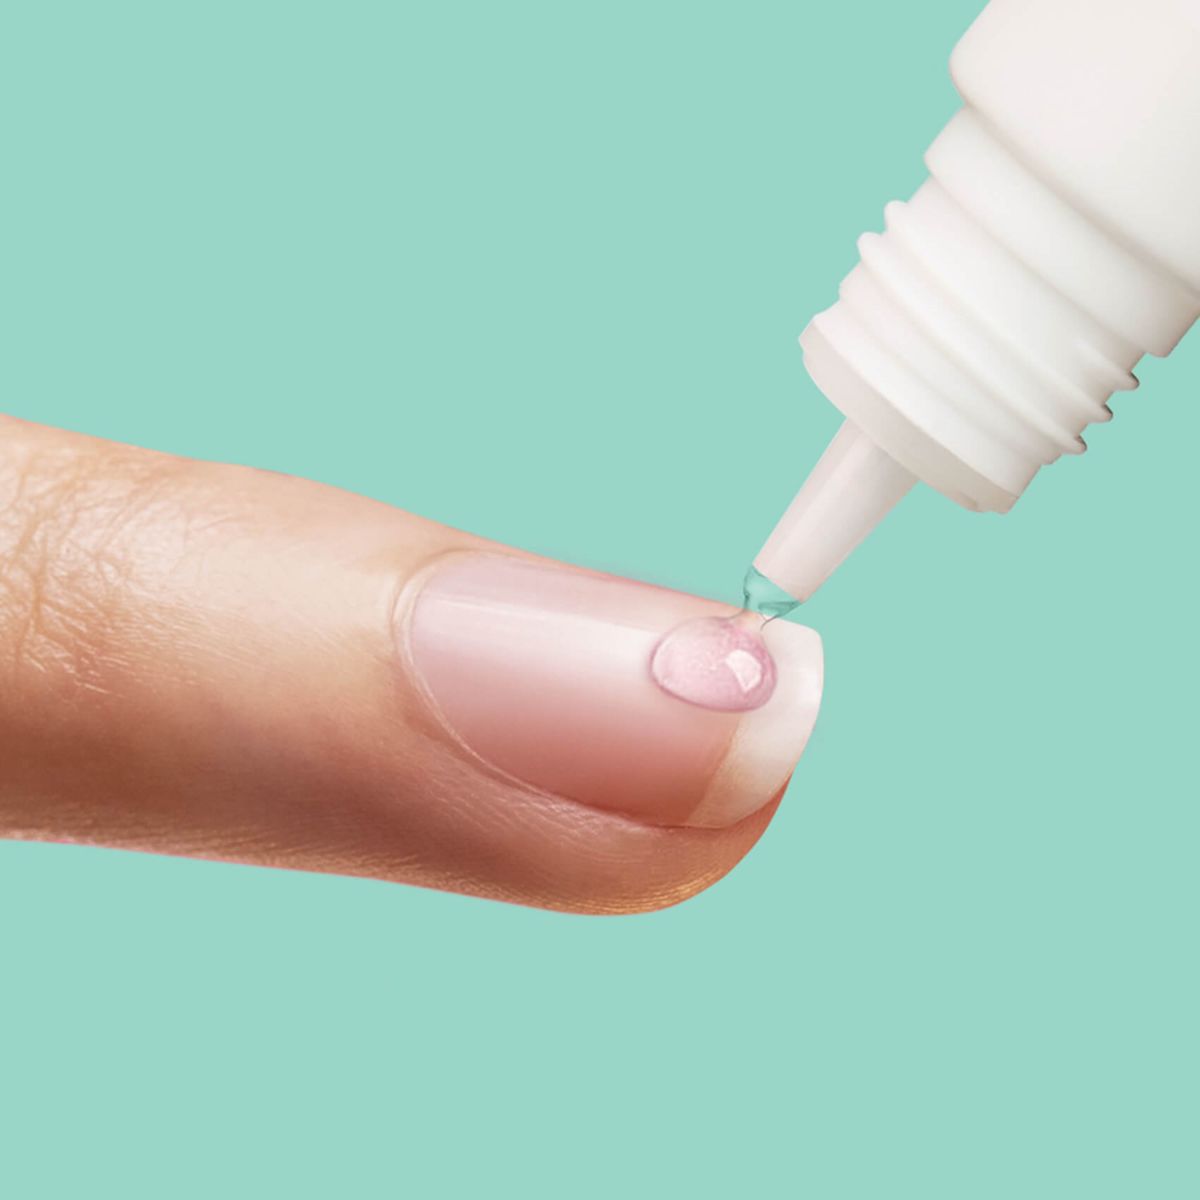 What Happens If You Use Super Glue For Fake Nails? [The Truth]